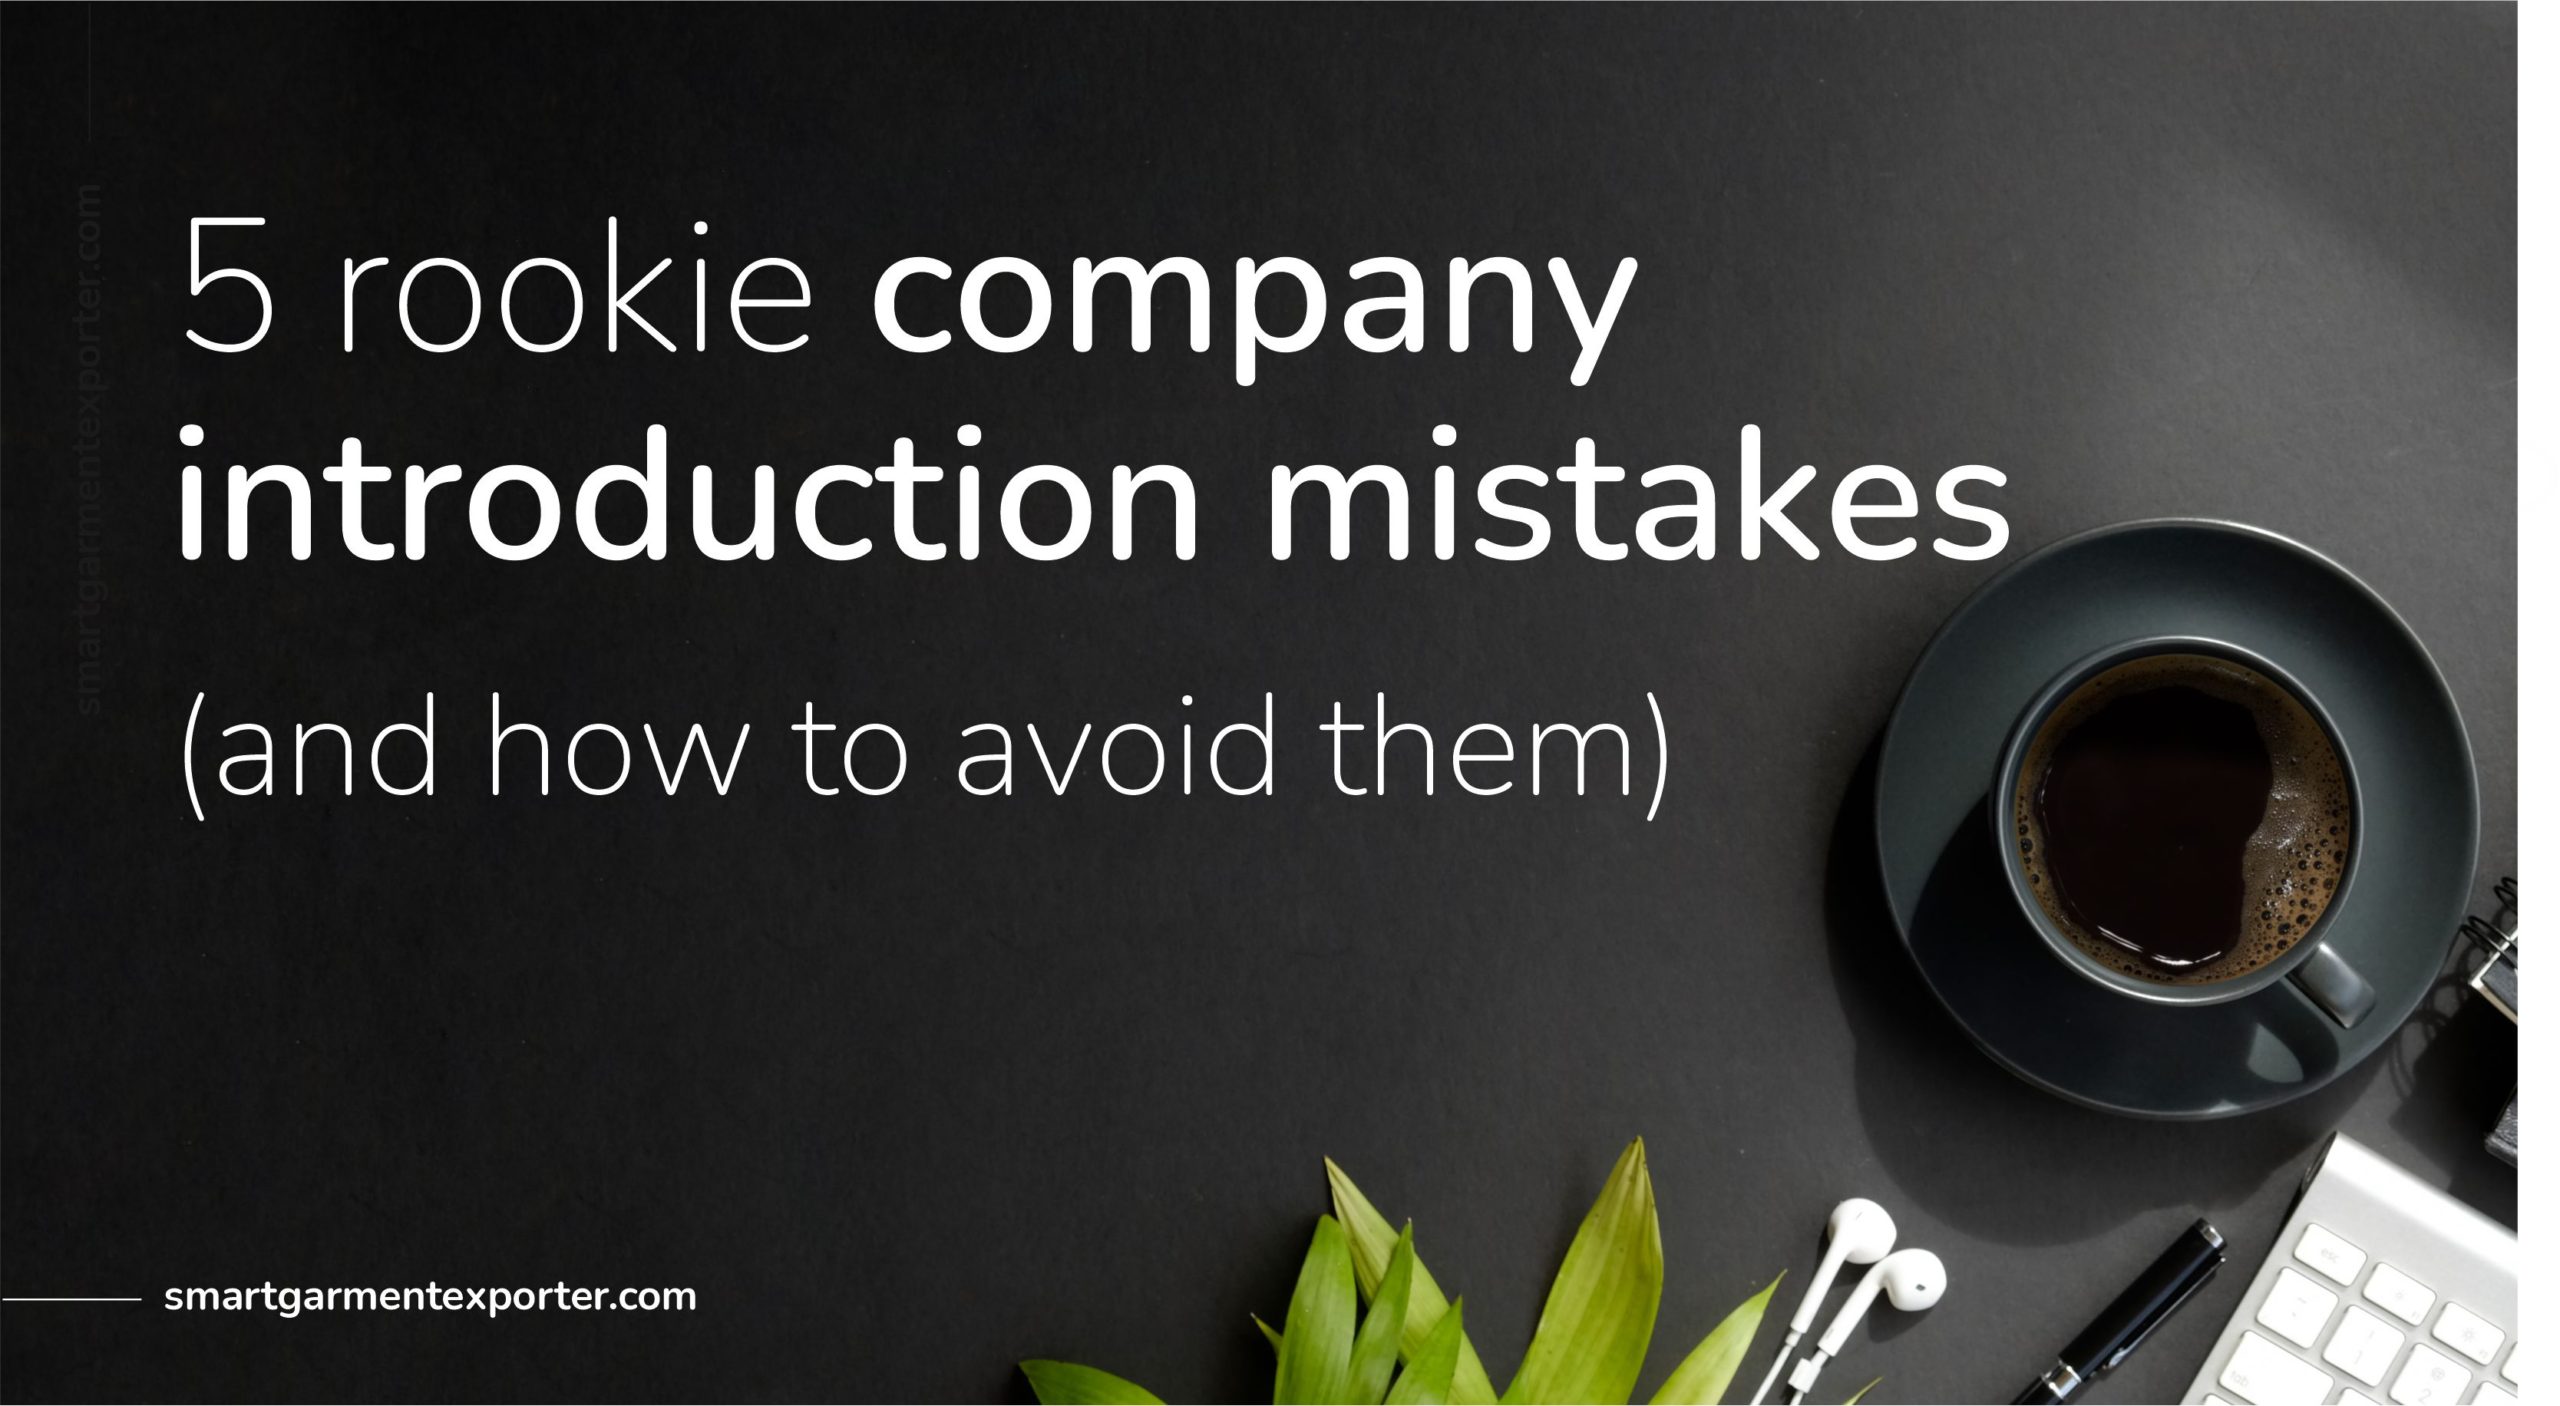 5 rookie company introduction mistakes in the textile industry (and how to avoid them)